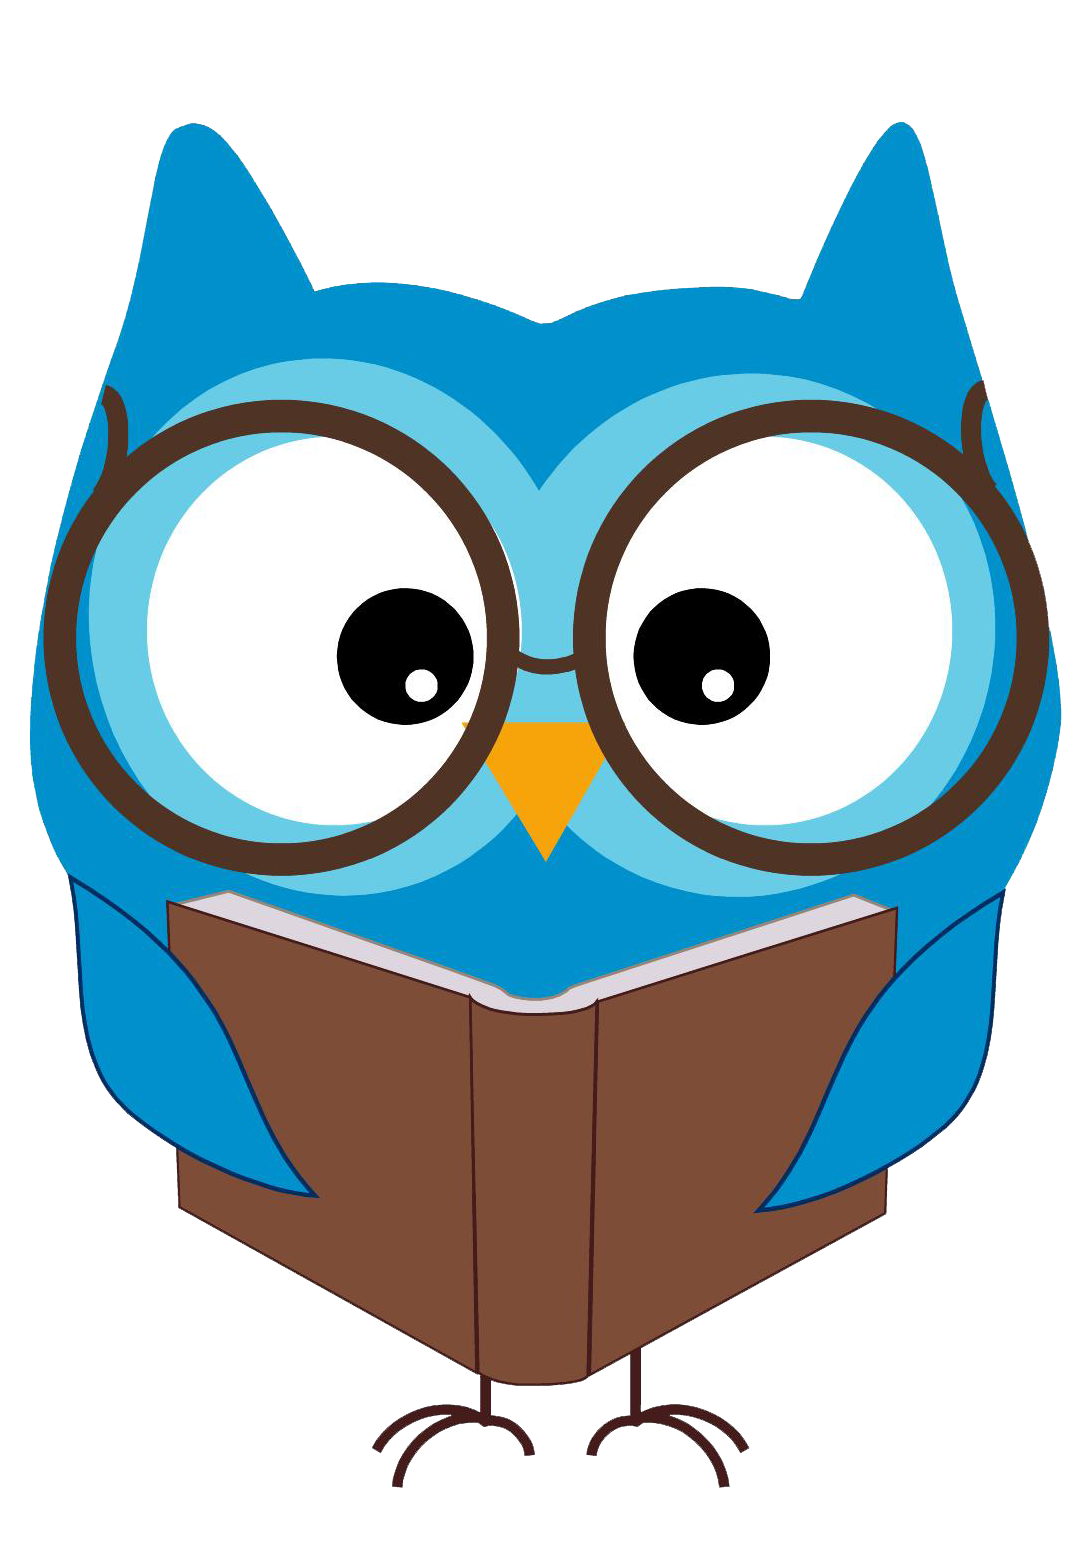 reading-owl-clip-art-cliparts-co-LSchV5-clipart.png